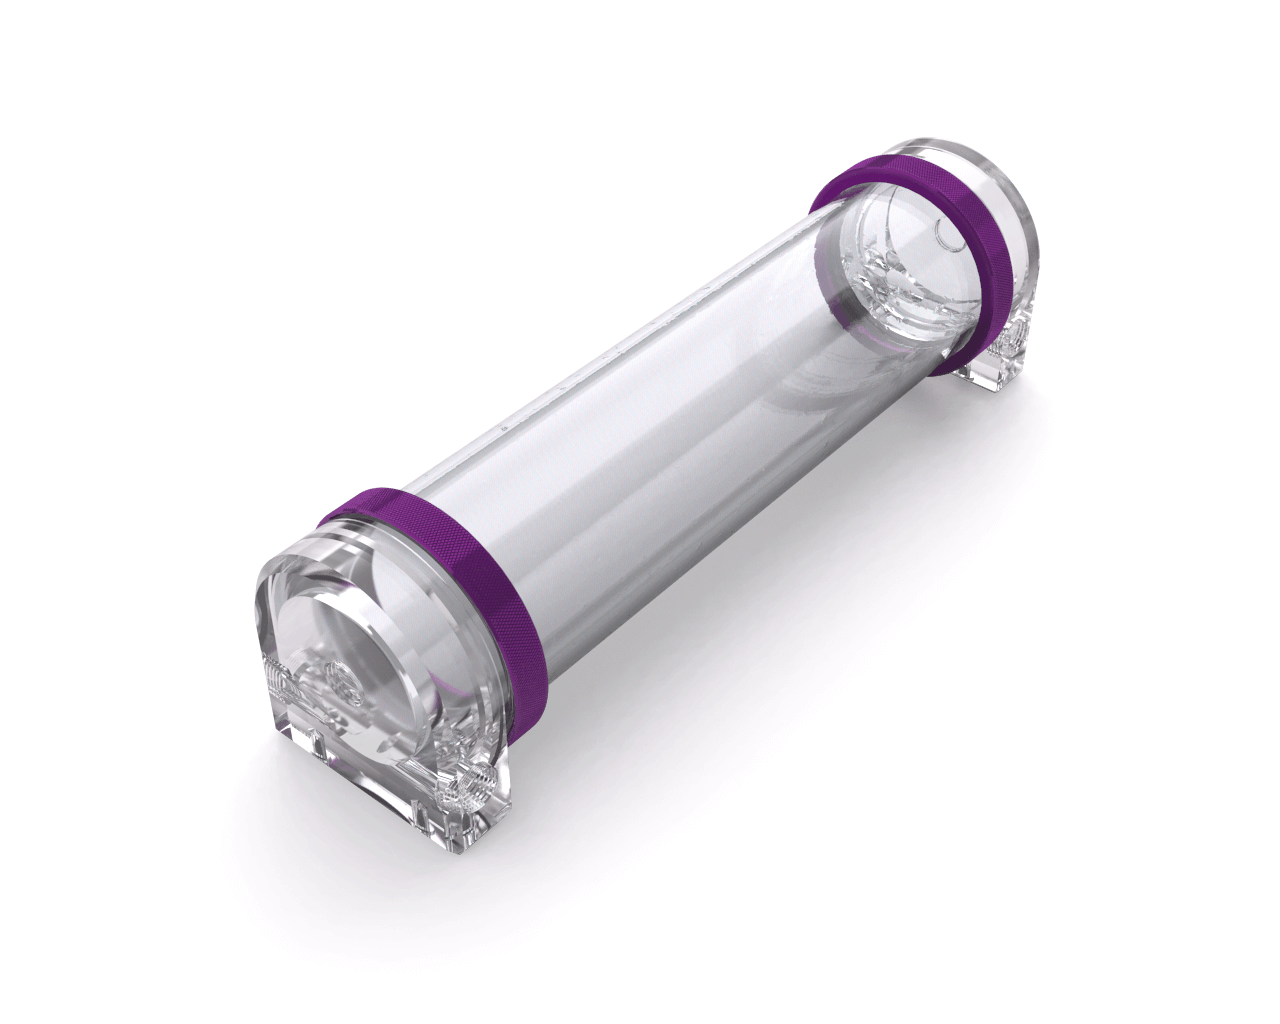 PrimoChill CTR Hard Mount Phase II Reservoir - Clear PMMA – 240mm - PrimoChill - KEEPING IT COOL Candy Purple